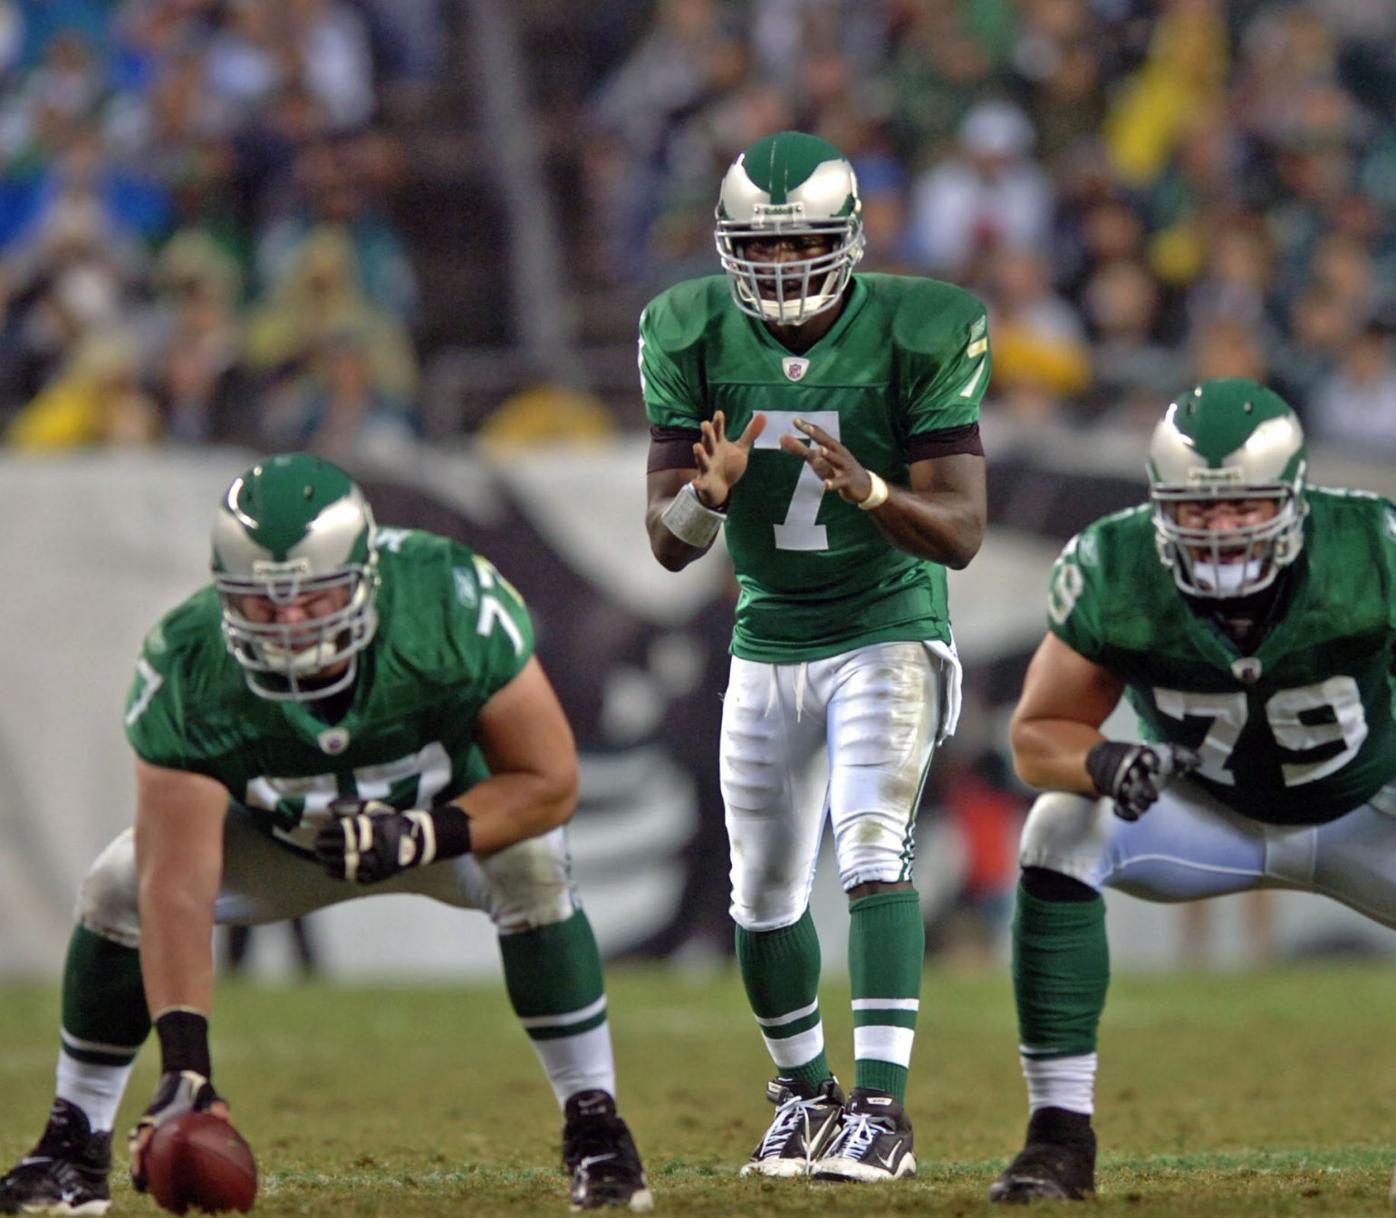 Eagles owner Jeffrey Lurie confirms popular 'Kelly Green' uniforms